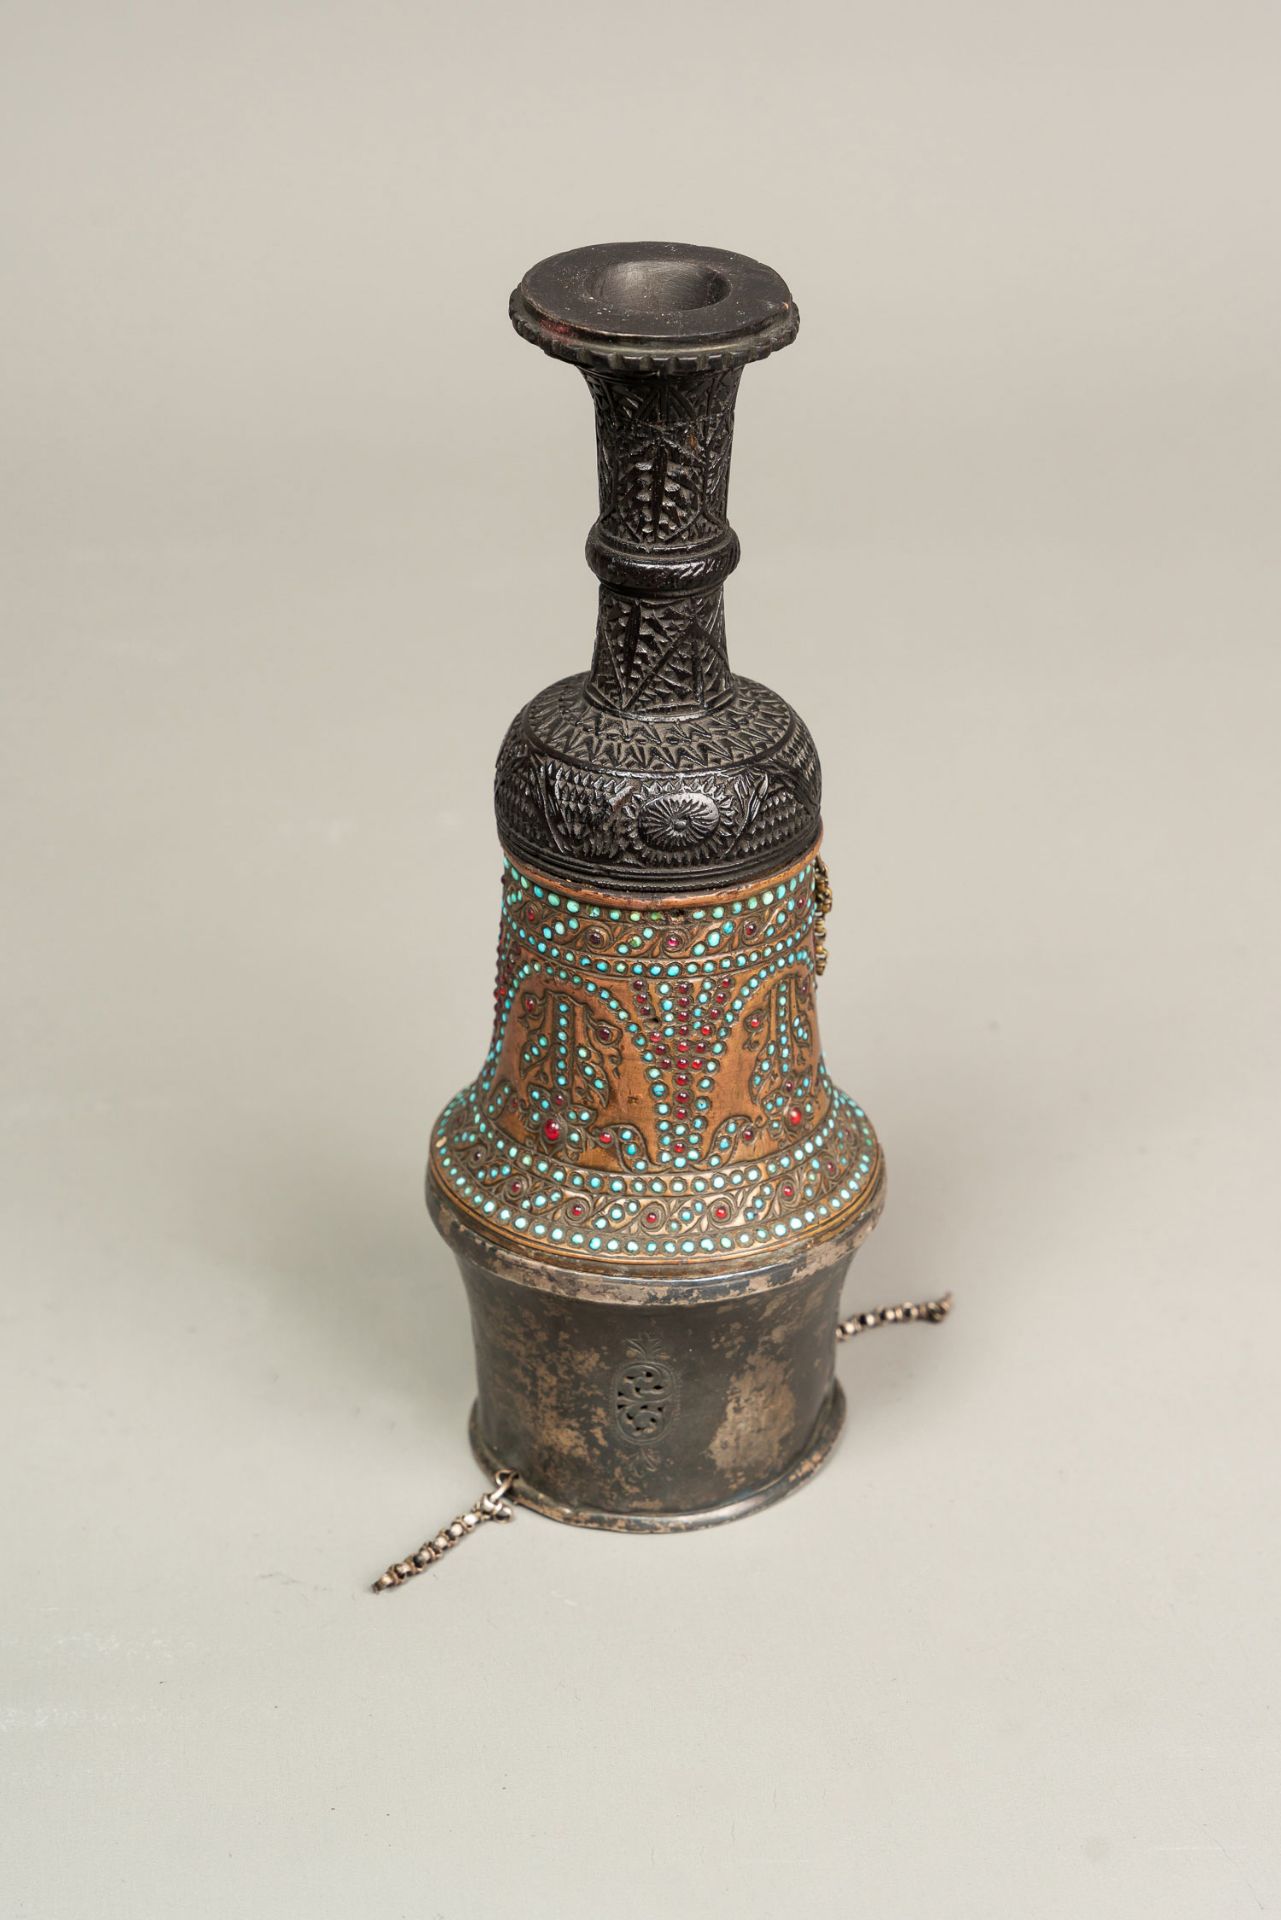 Indo-Chinese Cerimonial Object